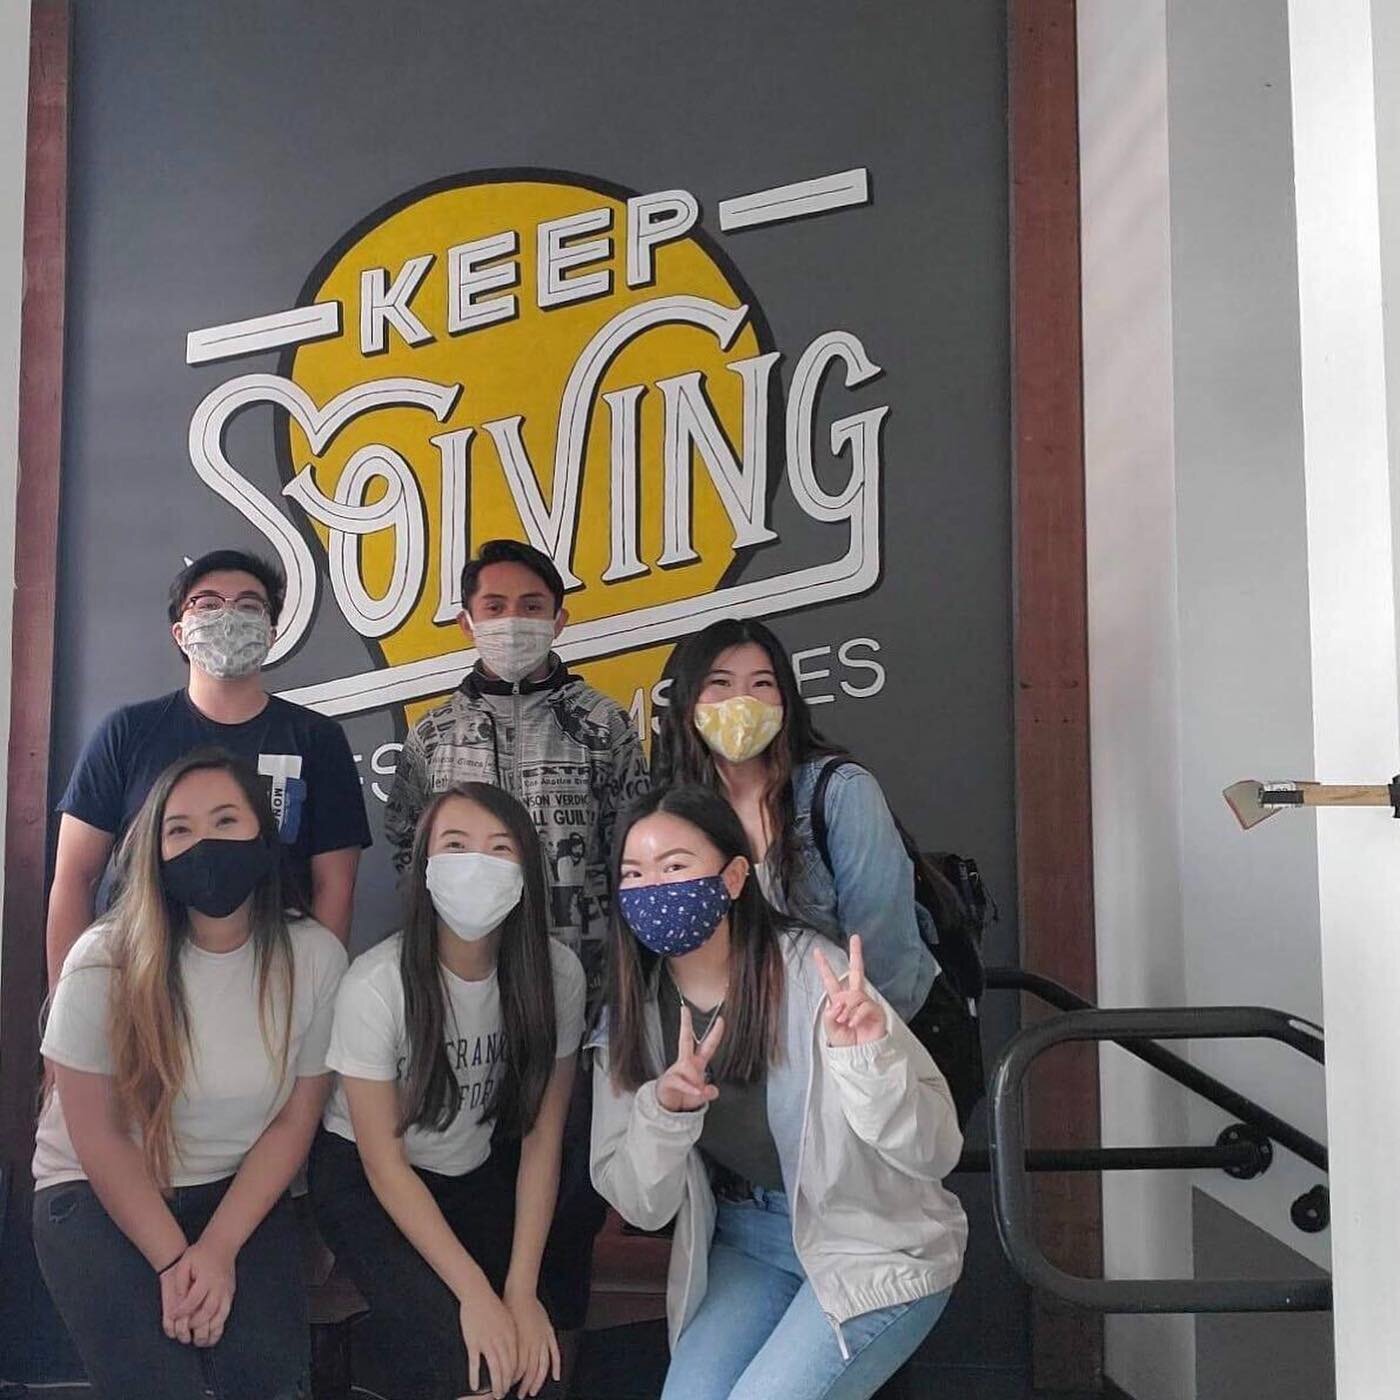 Today&rsquo;s #outhriverecap goes to @cluesandgumshoesescaperoom, the first and only escape room based in Berkeley, CA. Clues and Gumshoes provides Berkeley with a place where thinking, solving puzzles, riddles, and teamwork is celebrated. Their visi